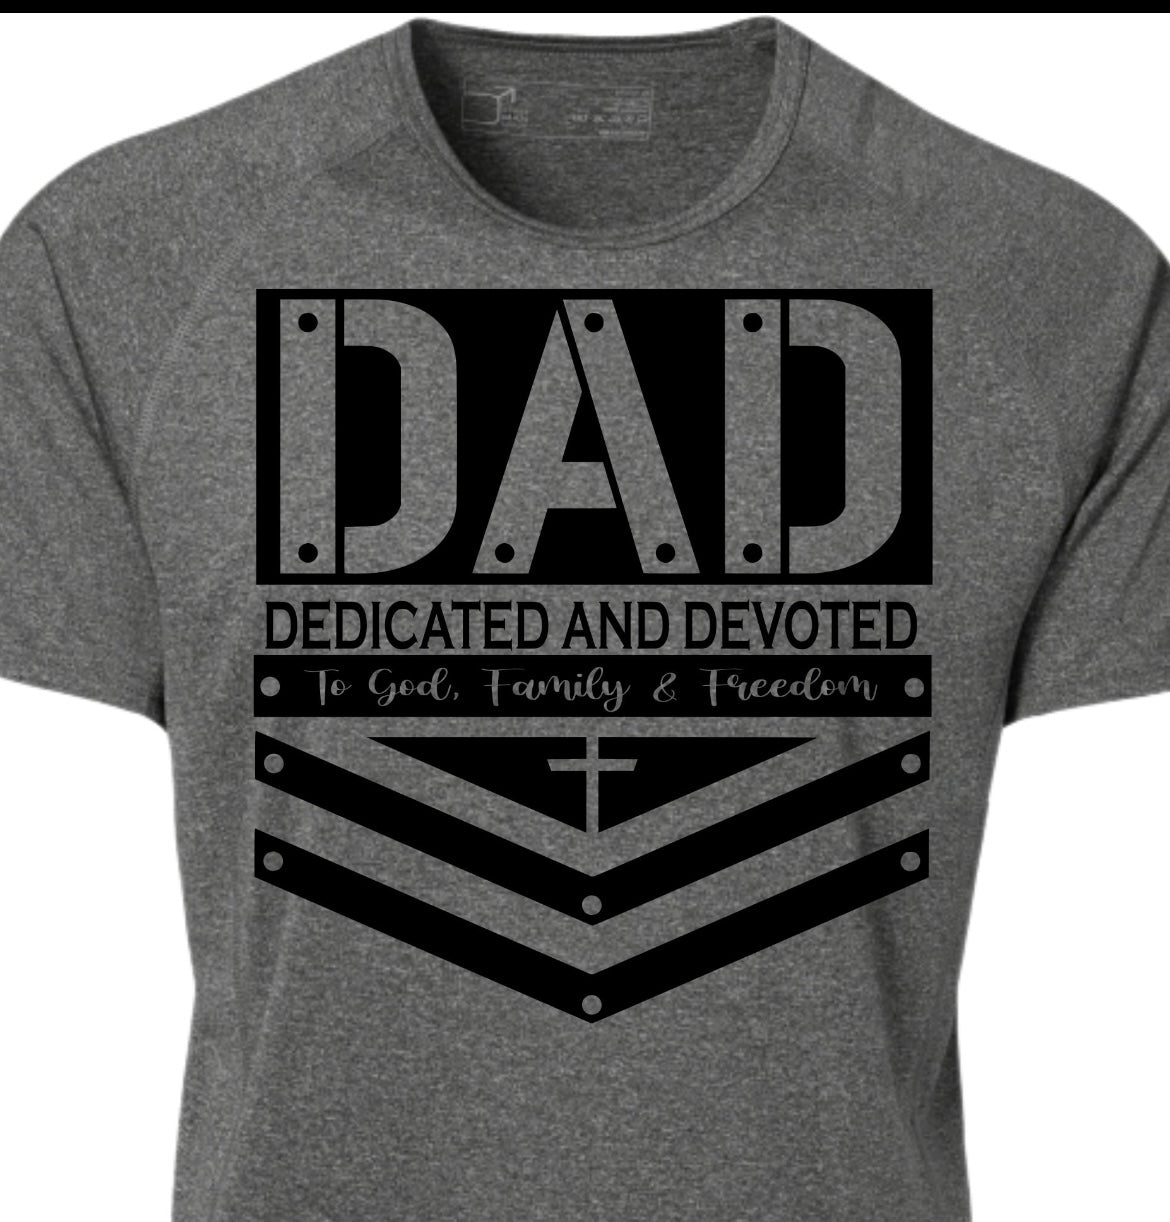 Dad: Dedicated and Devoted